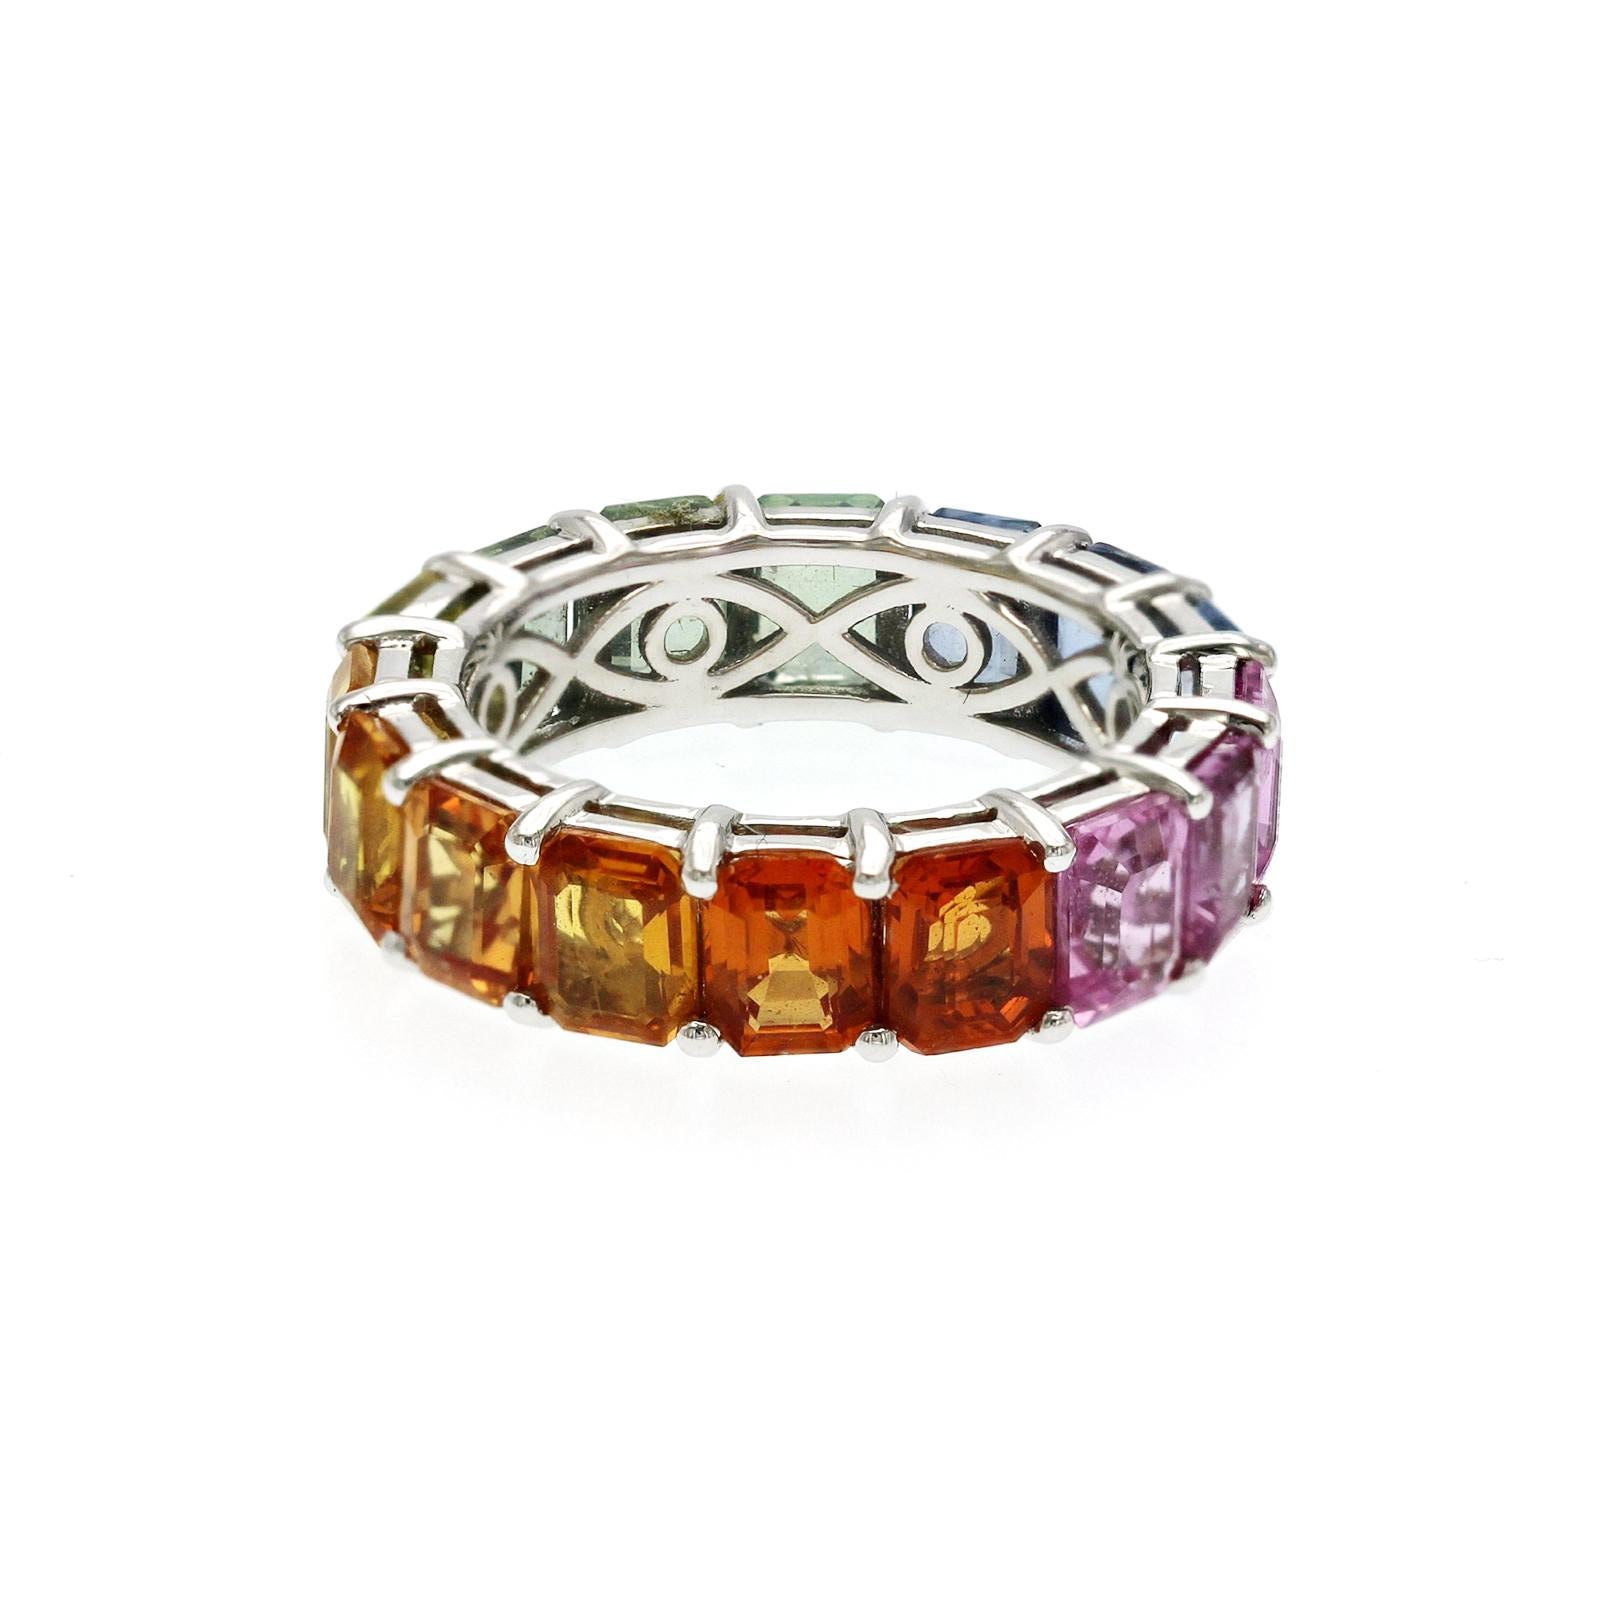 4.97 CT Multicolor Sapphire in 18K White Gold Band Ring Size 5.5 For Sale 3